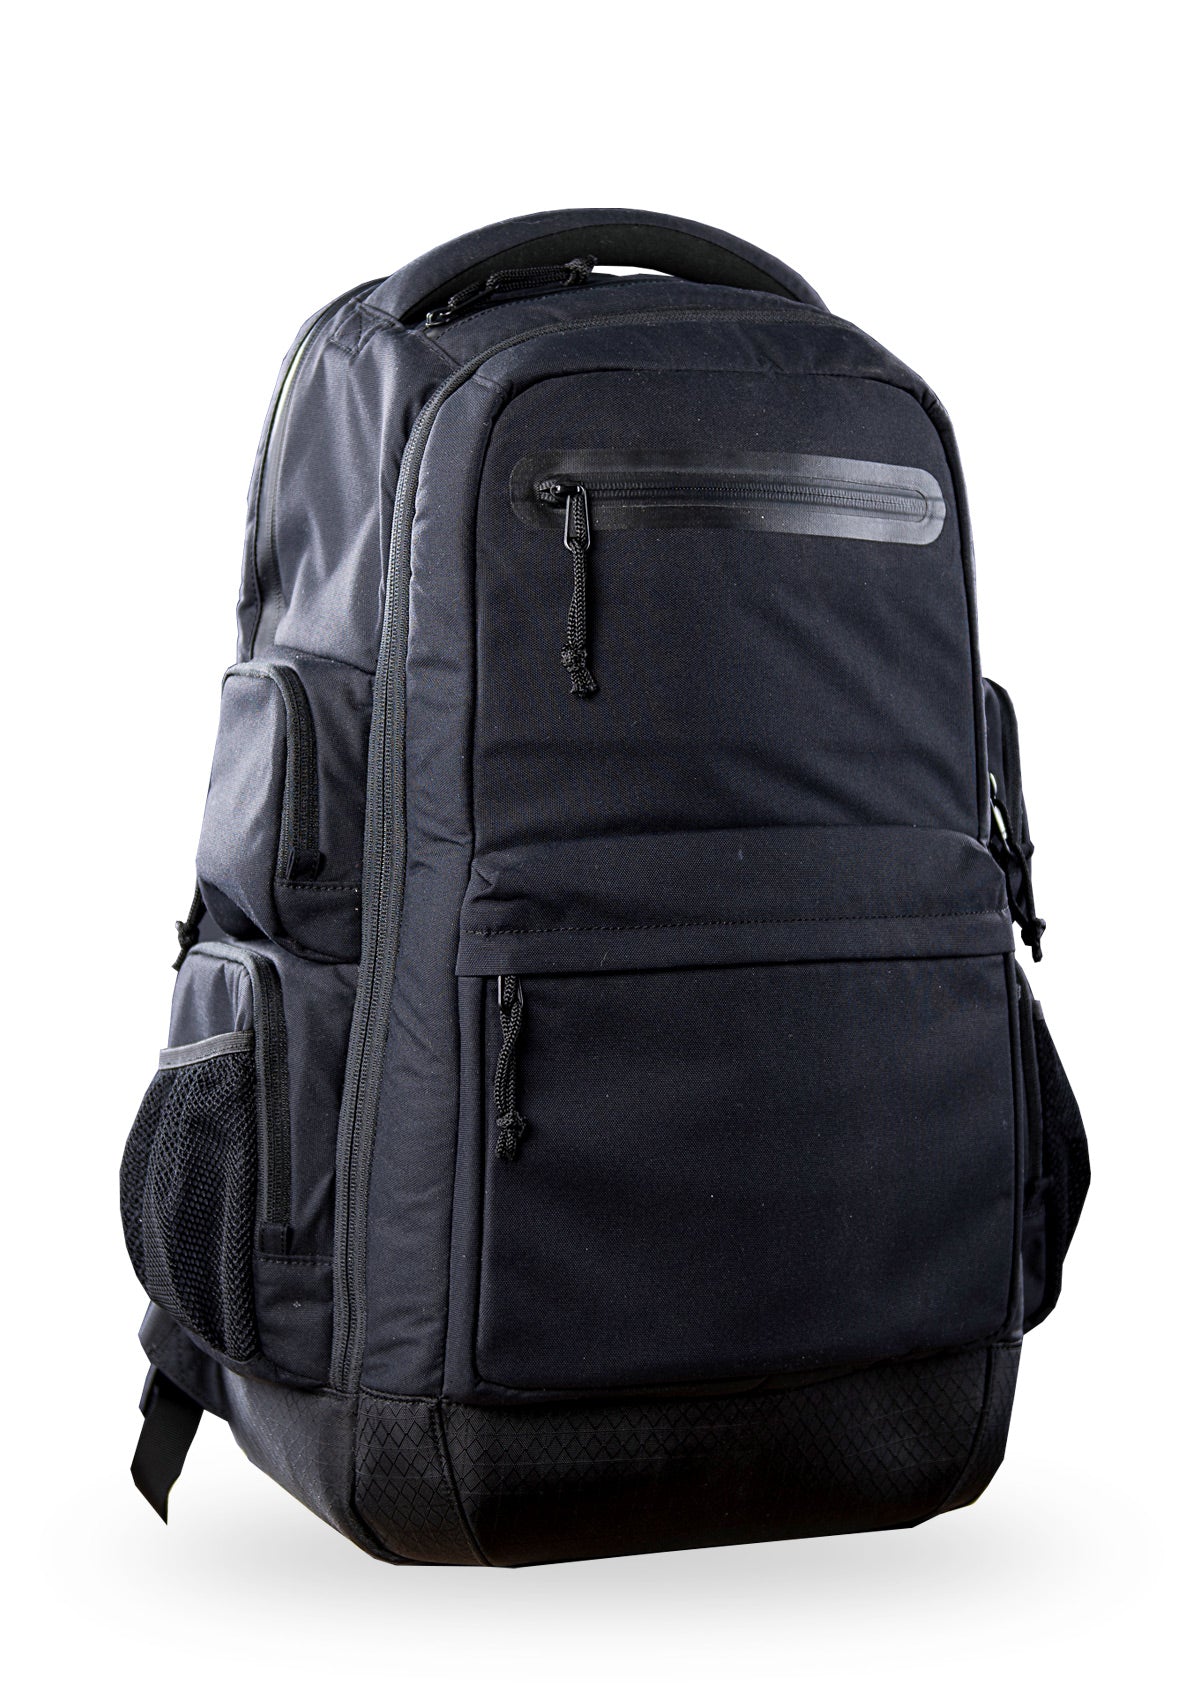 needessentials travel backpack surfing black non branded 